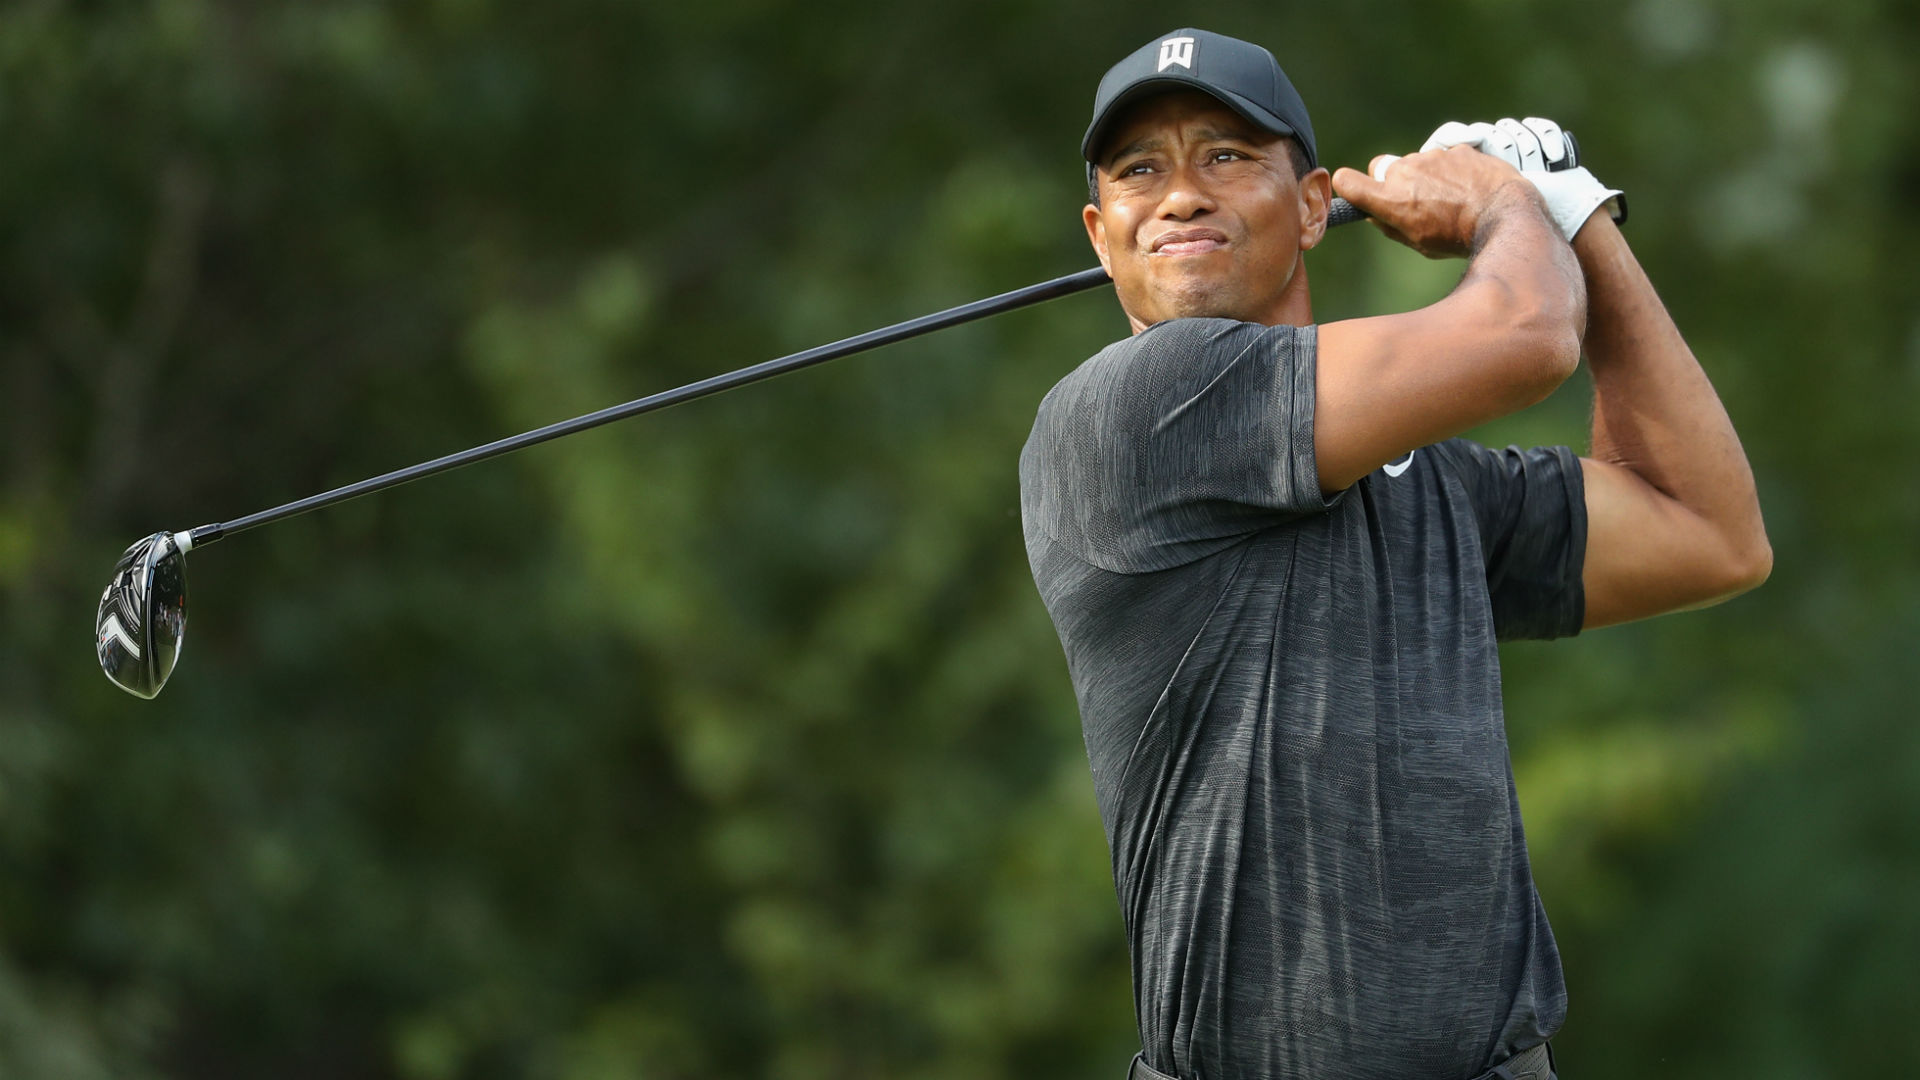 Tiger Woods Look-Alike Wins The Day At TPC Boston Tournament